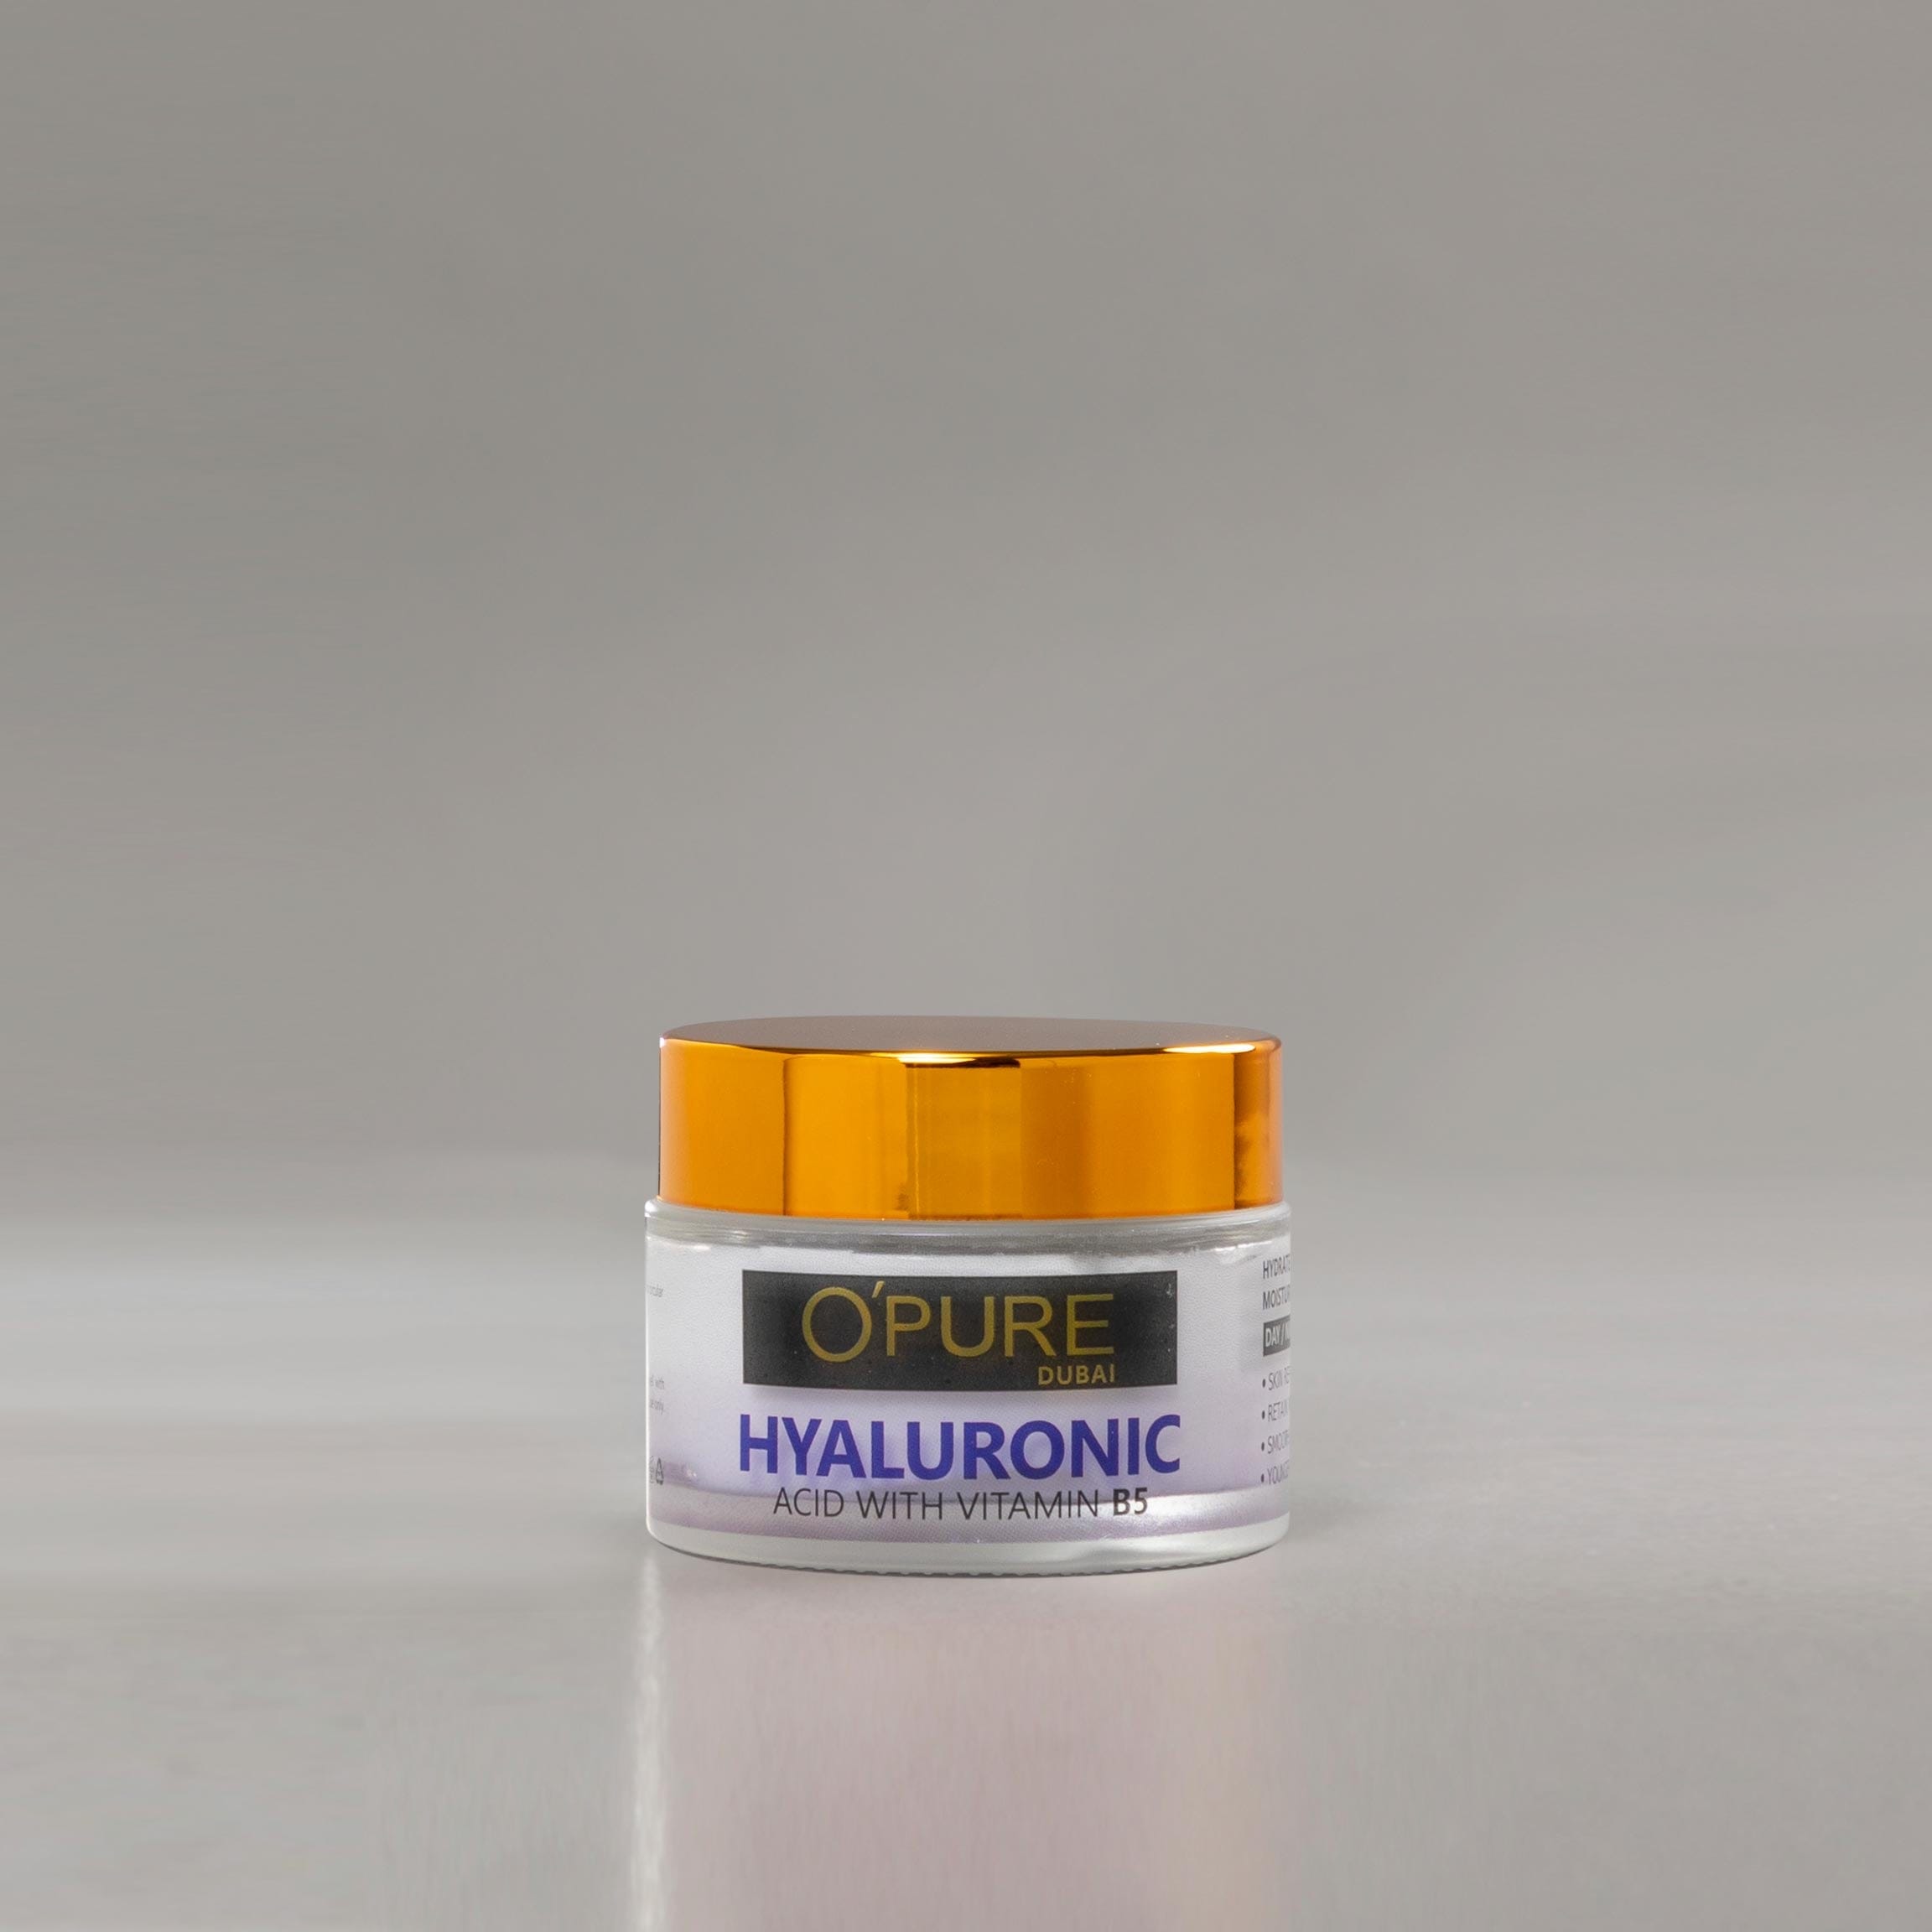 Hyaluronic Cream Hydrate Moisturize & Younger Looking Skin